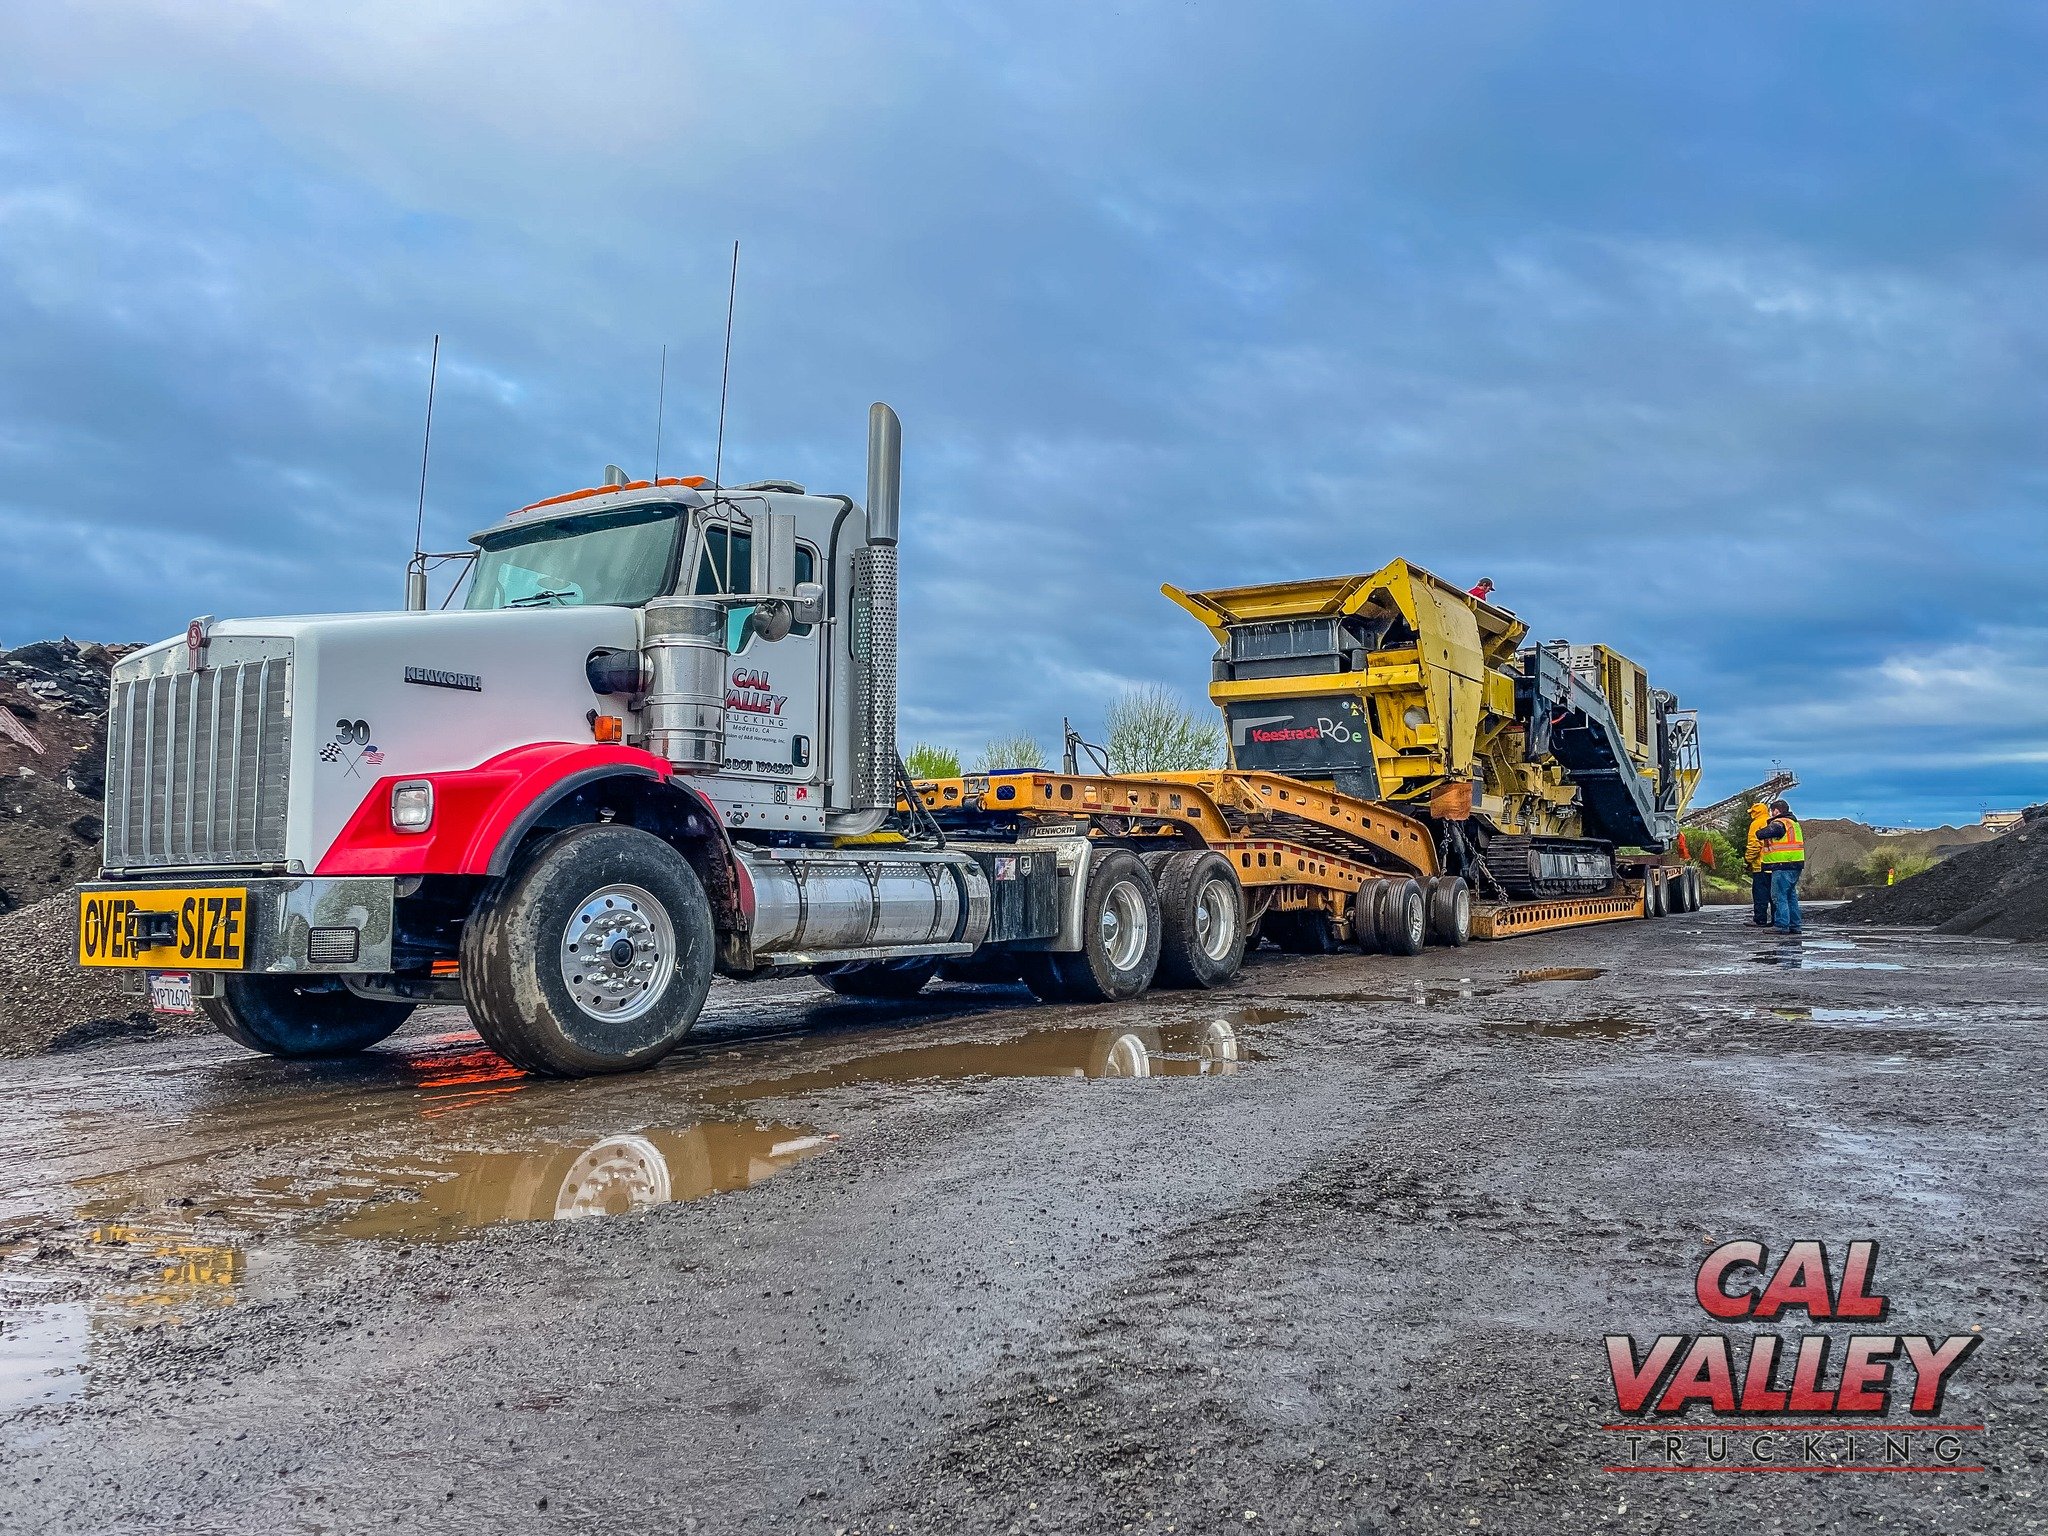 209-545-8300 is your number to call for heavy haul!

#calvalleytrucking #murraytrailers #kenworth #heavyhaul #crusher #oversize #wearecalvalley